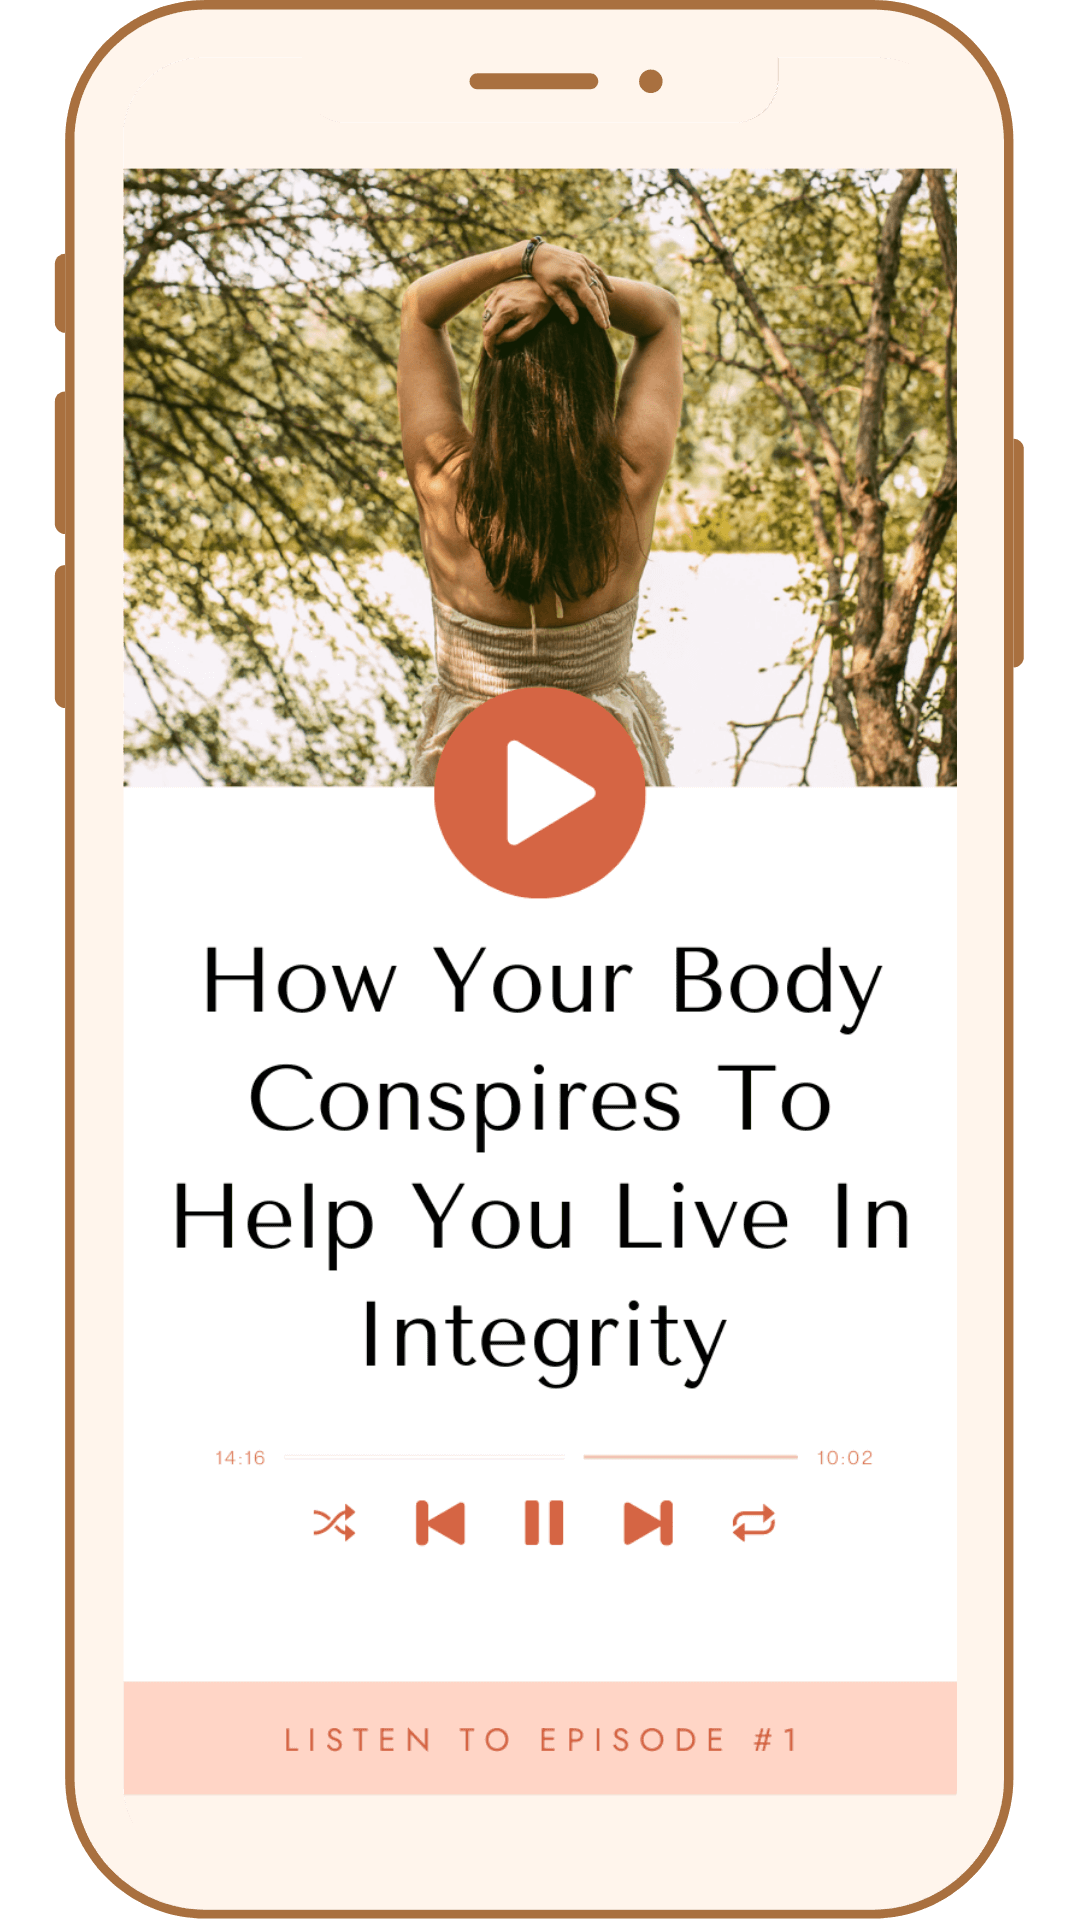 How Your Body Conspires To Help You Live In Integrity, purpose, life coach, wayfinder, Kristi Amdahl